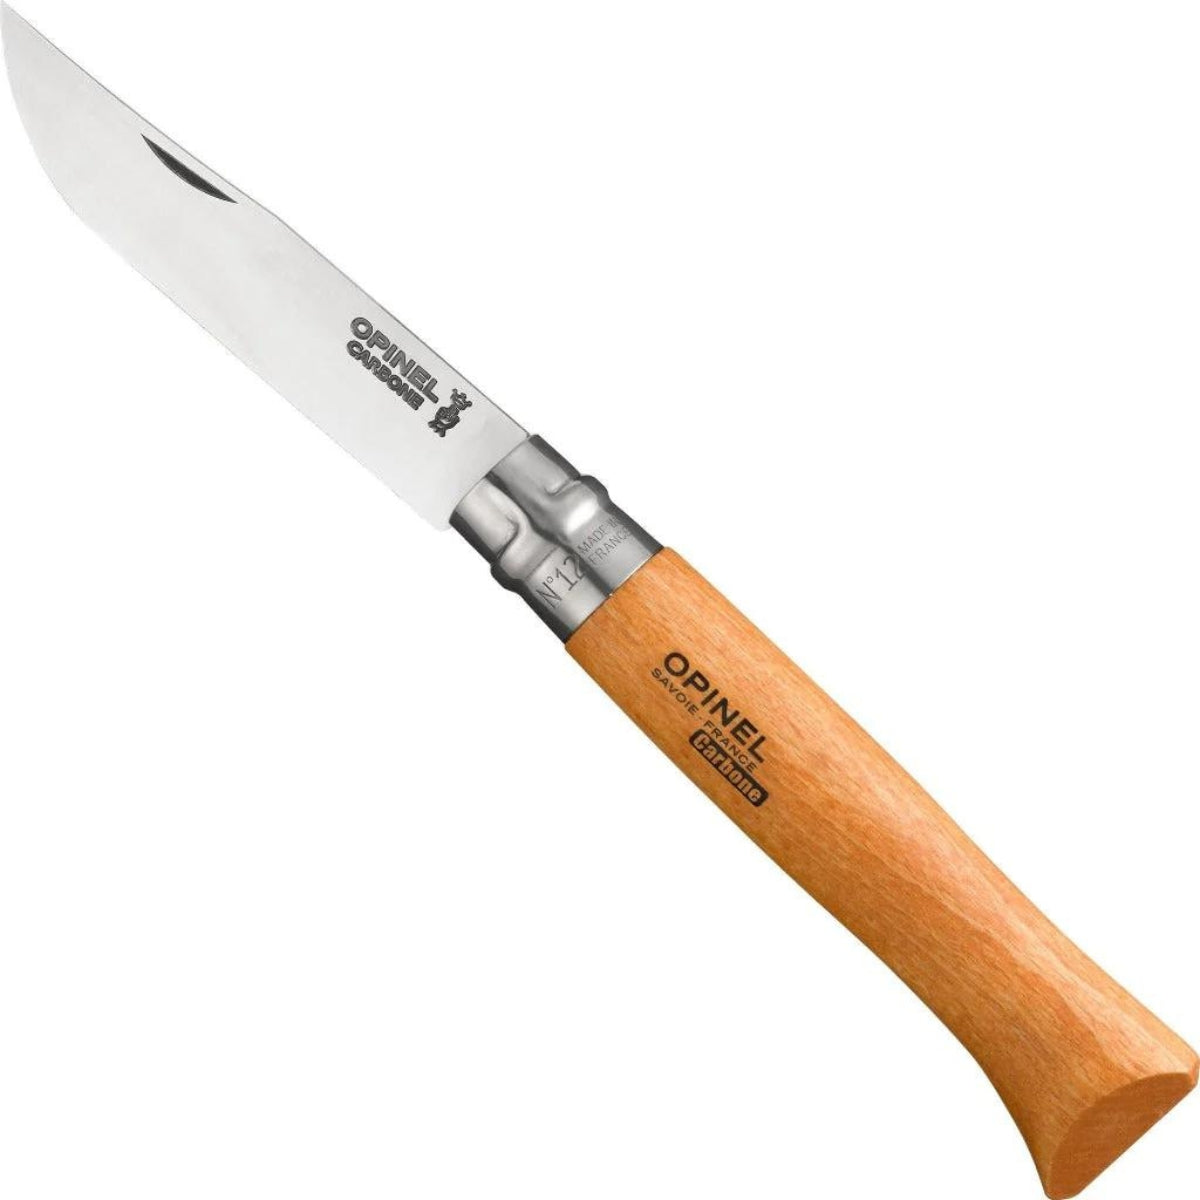 Opinel No. 12 Carbon Steel Knive